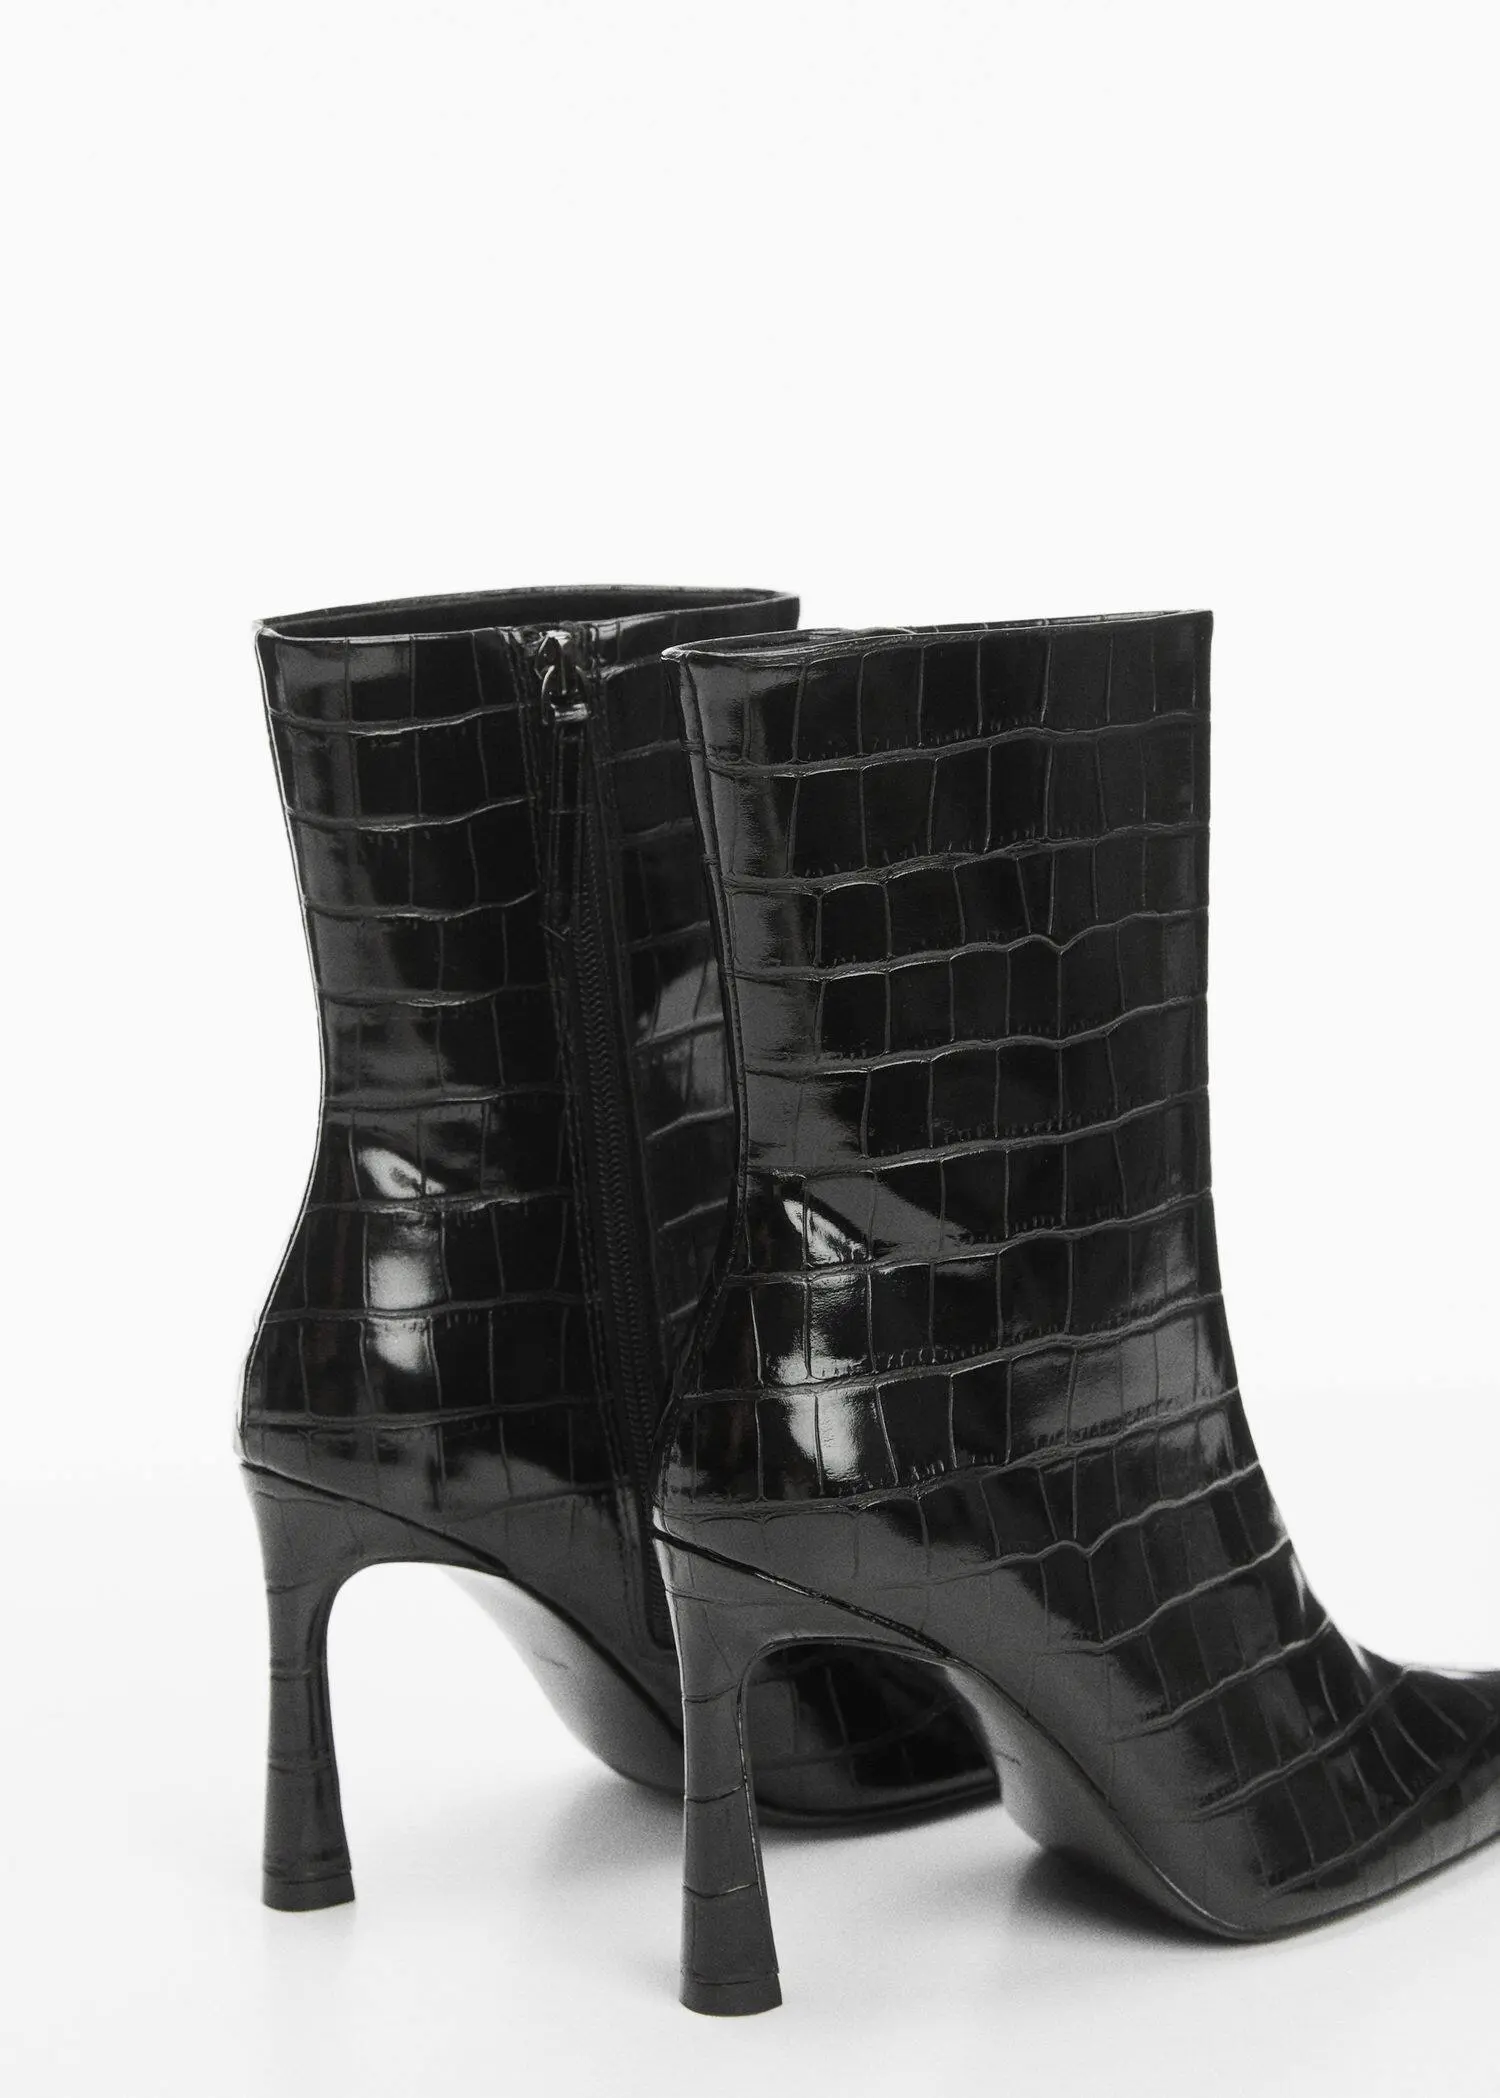 Mango Coco leather-effect heeled ankle boots. 3